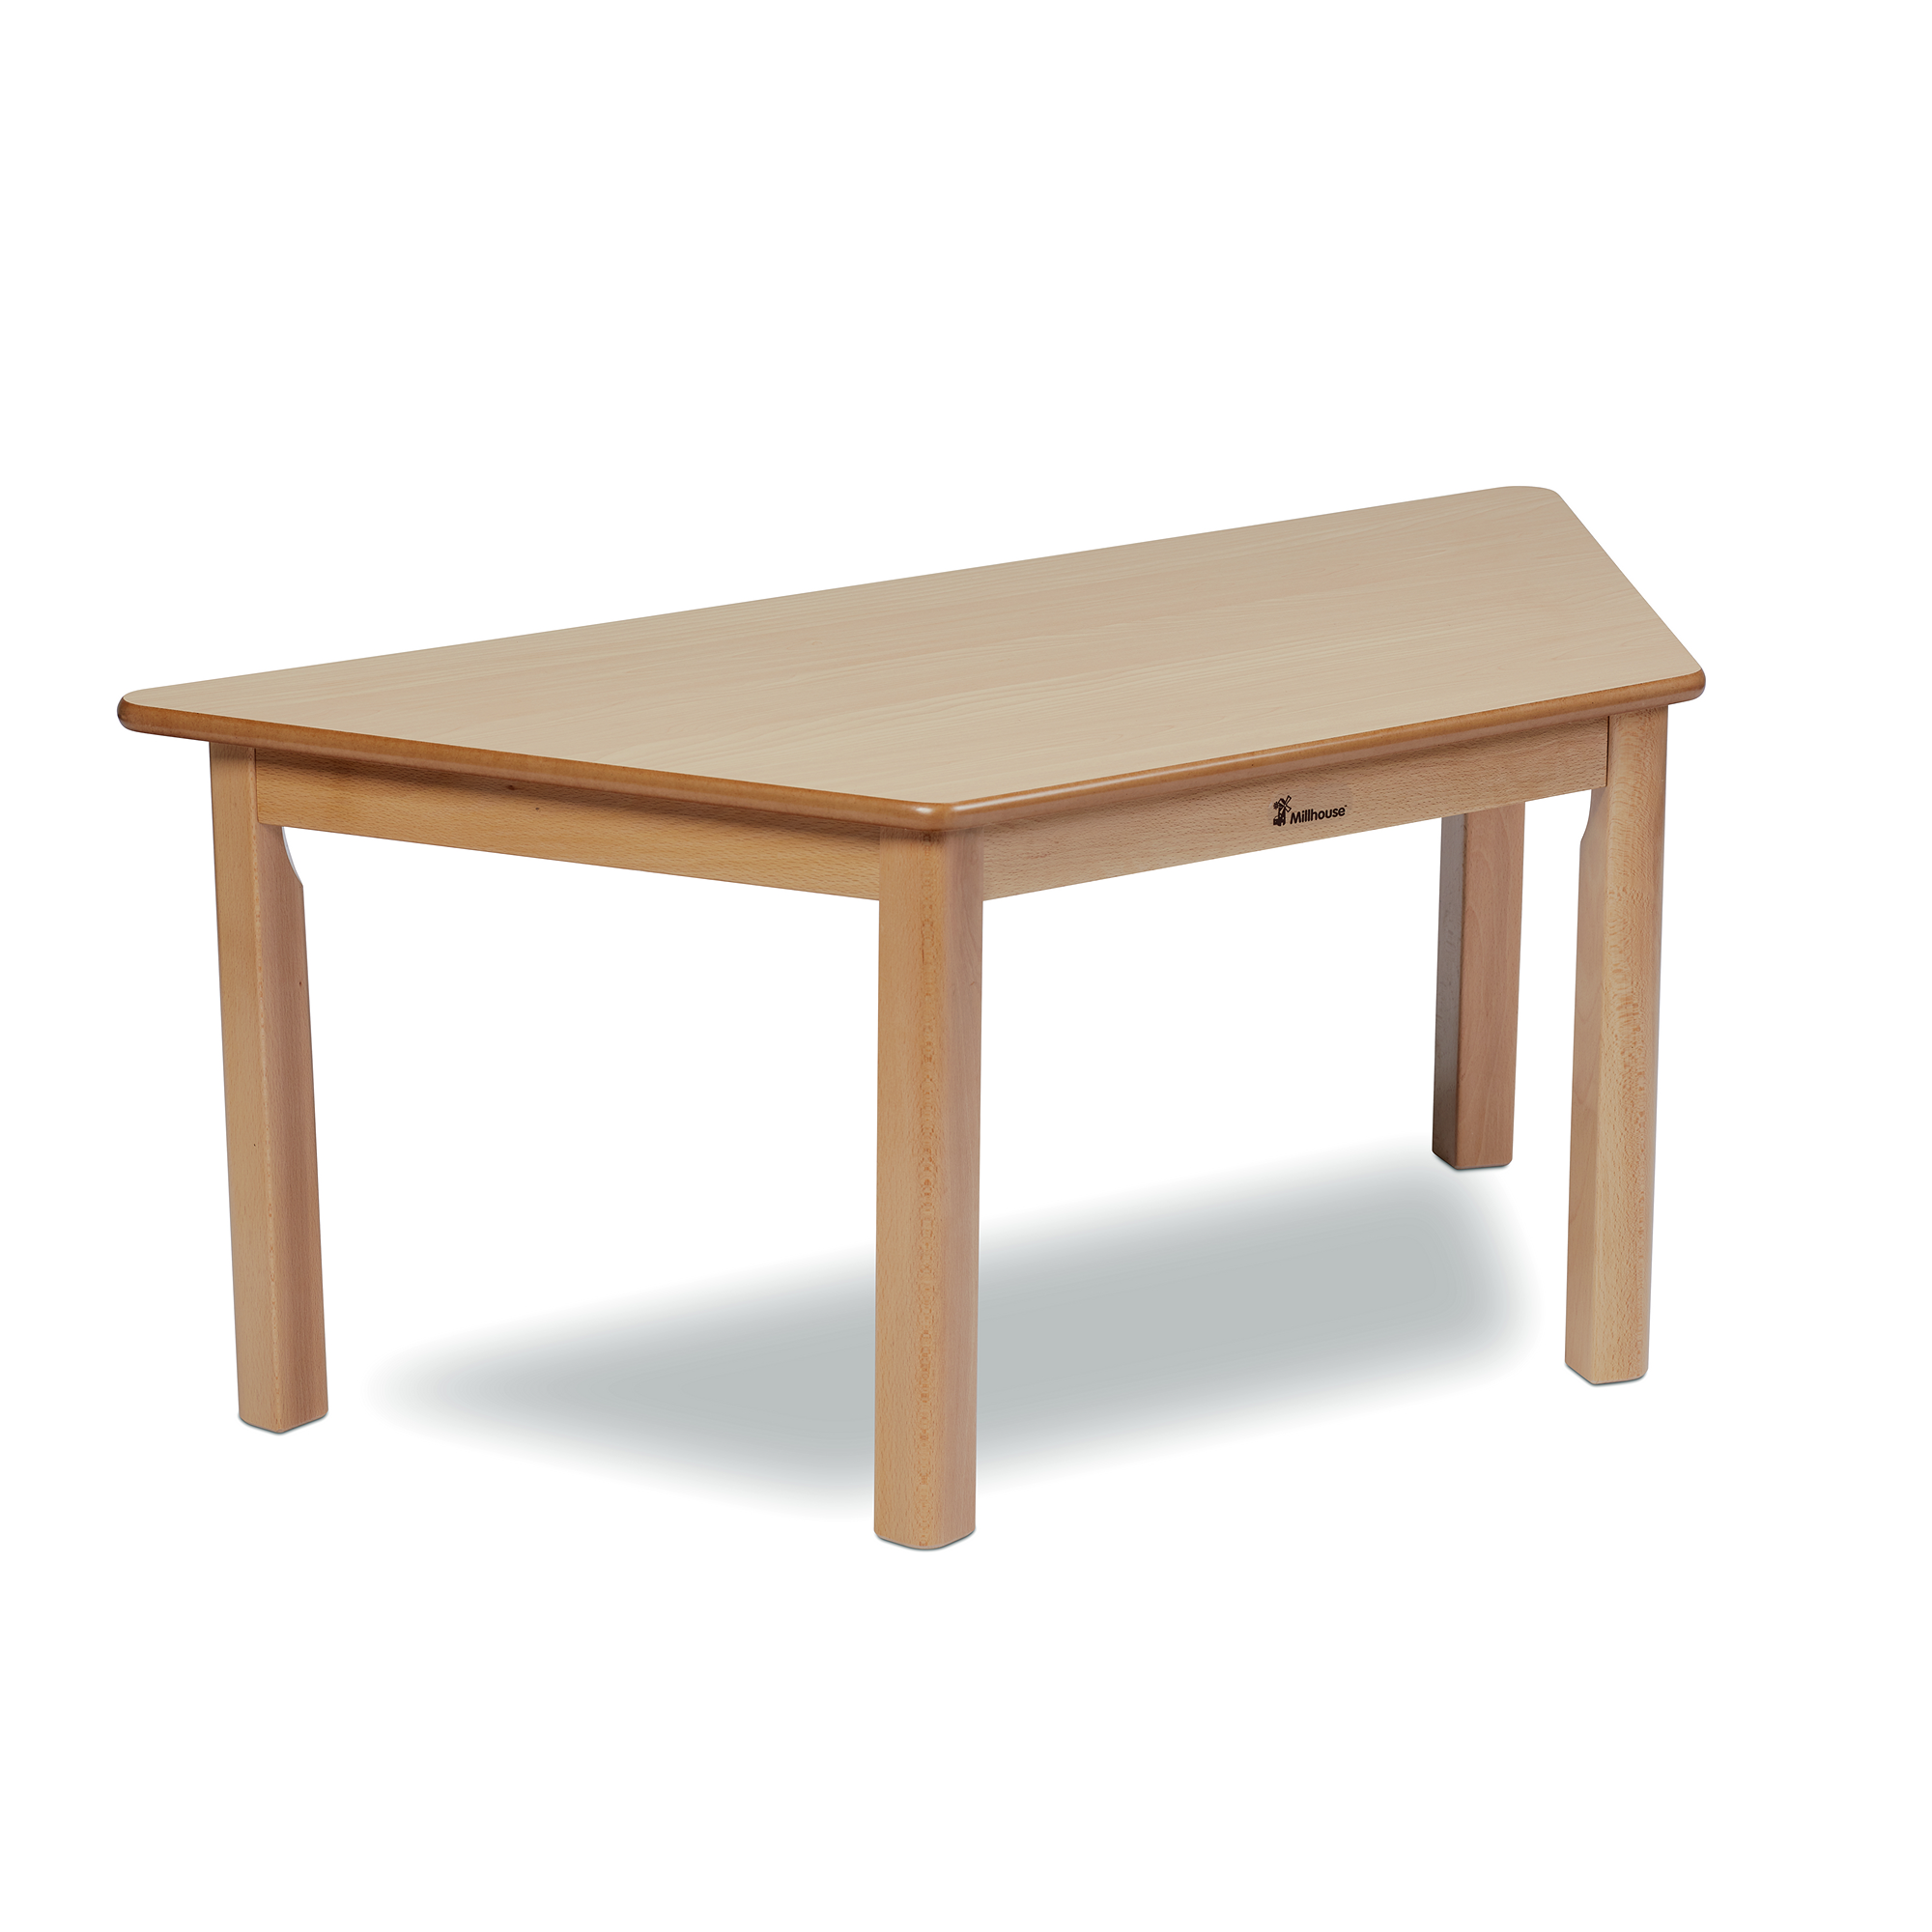 Trapezoid Table - 530mm Height